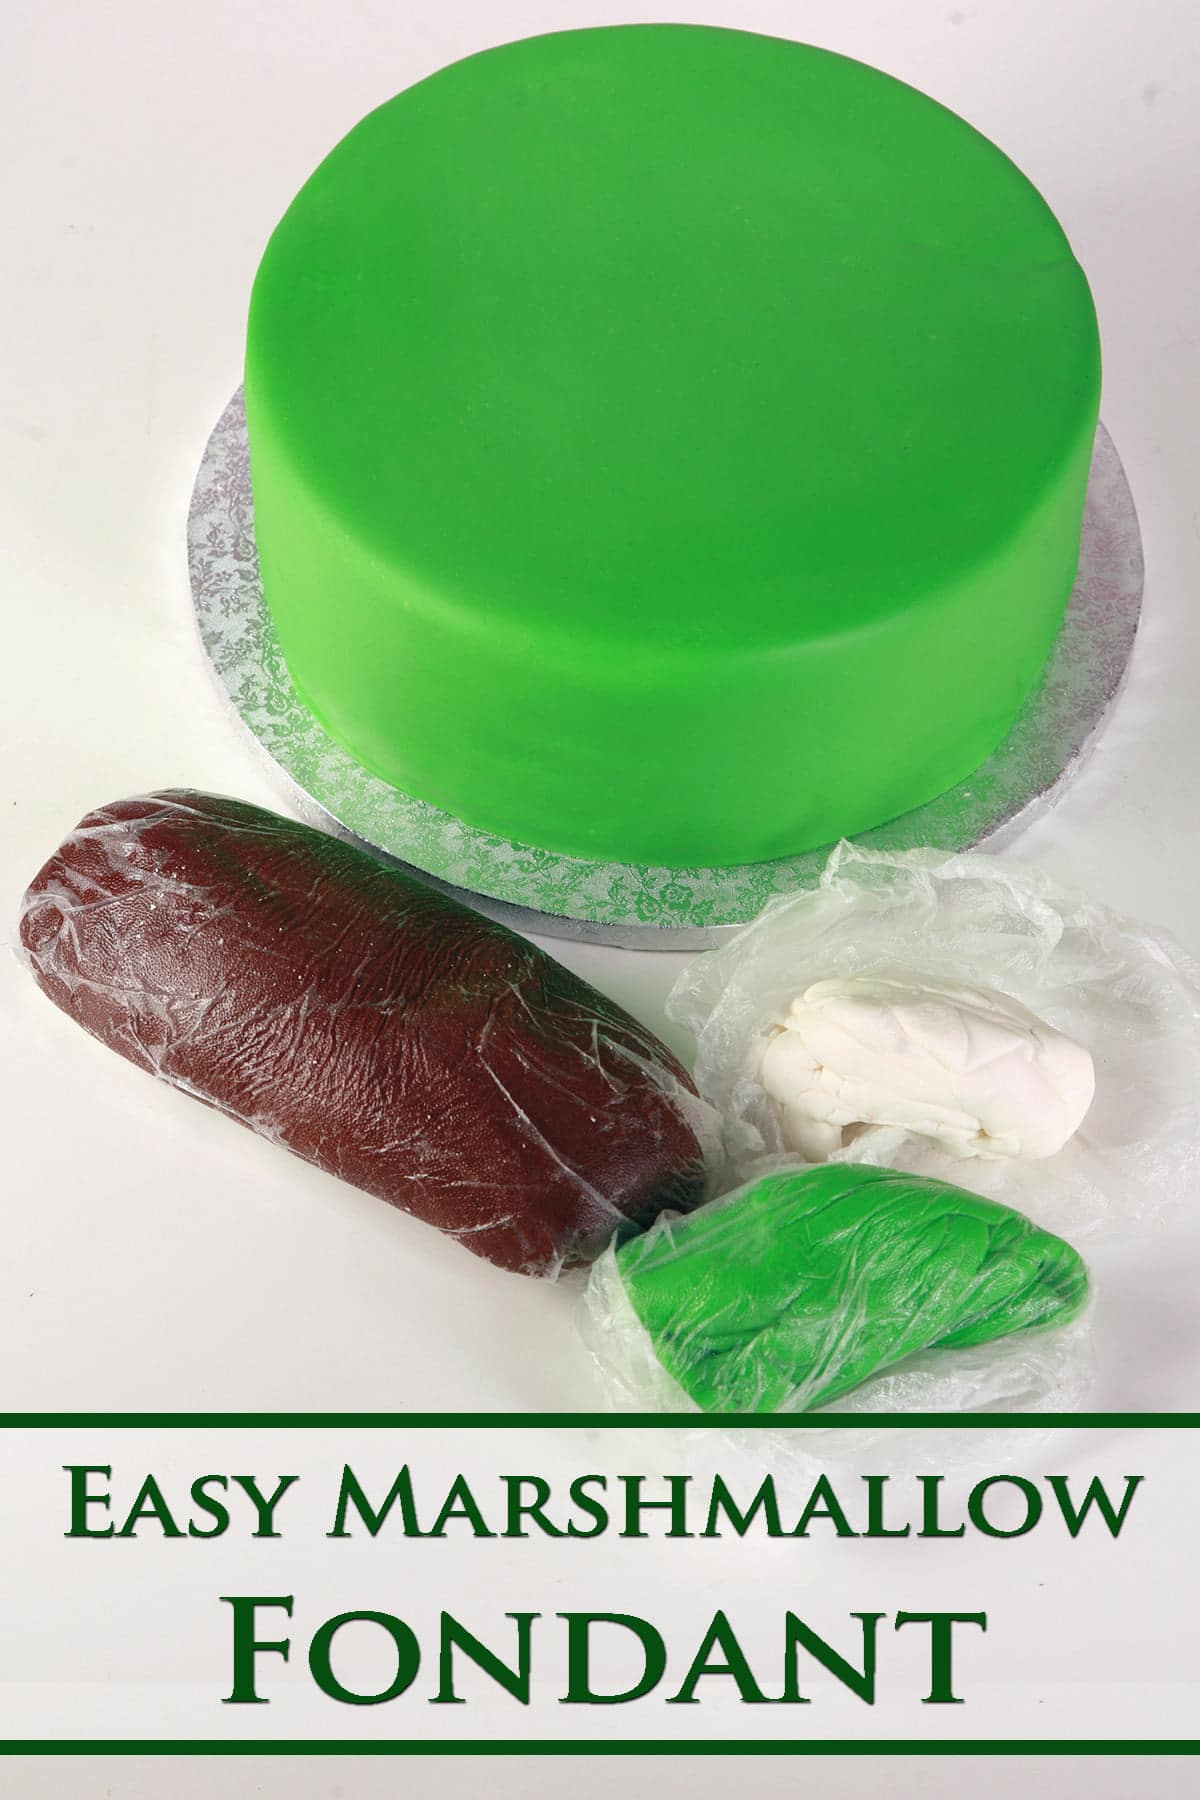 3 logs of marshmallow fondant - one brown, one greem, and one white - are in the foreground. A large round cake covered with smooth green fondant is in the background.